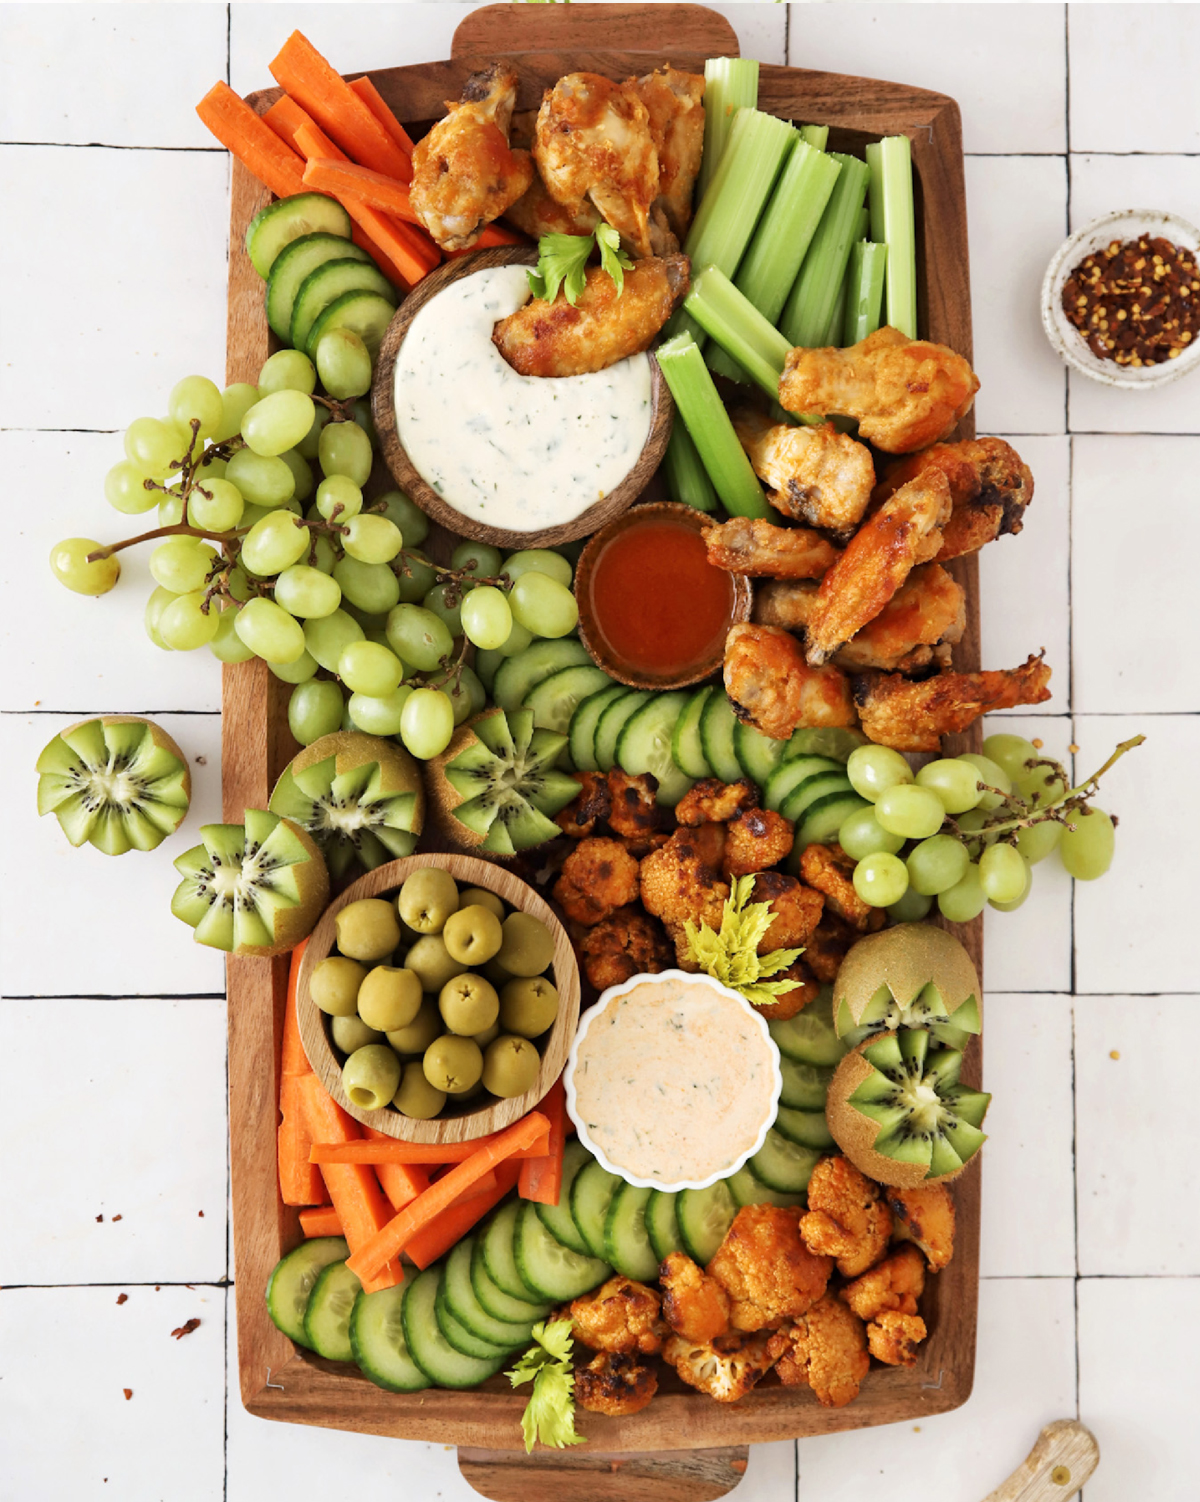 Wings, dips, cucumbers, carrots, celery, and kiwi complete Kayla's Kitch and Fix's Super Bowl snack board.